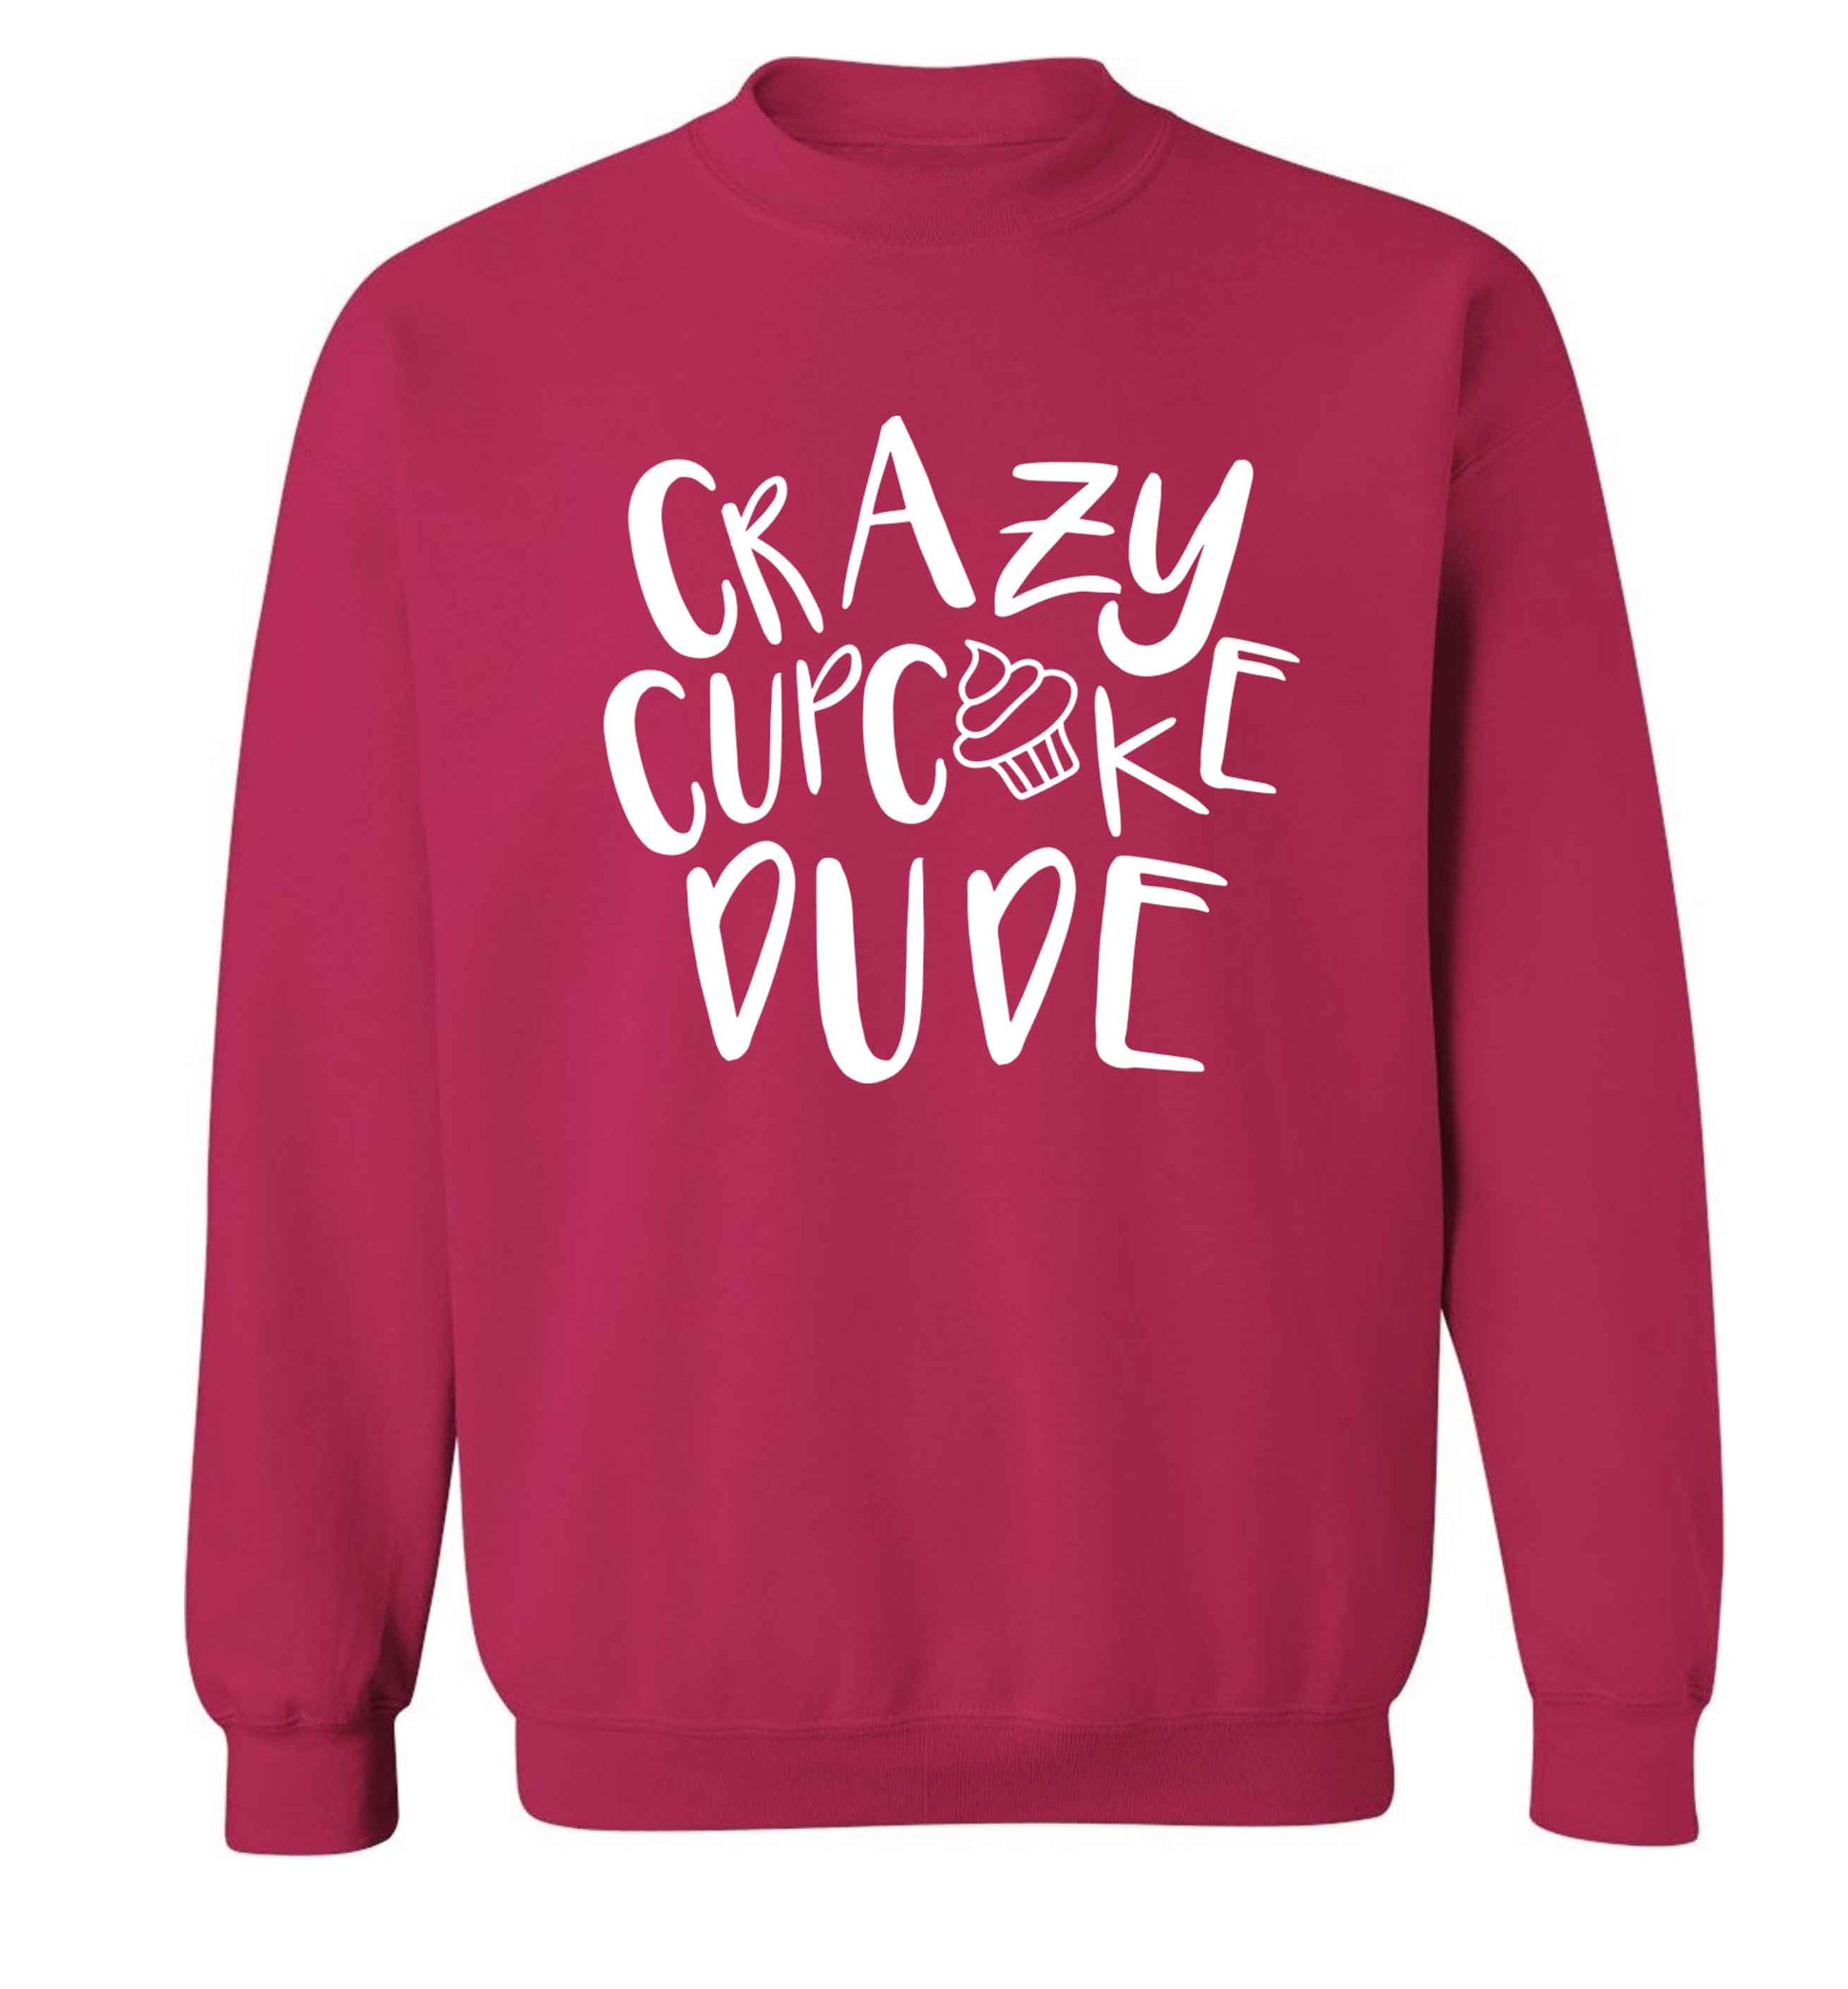 Crazy cupcake dude Adult's unisex pink Sweater 2XL